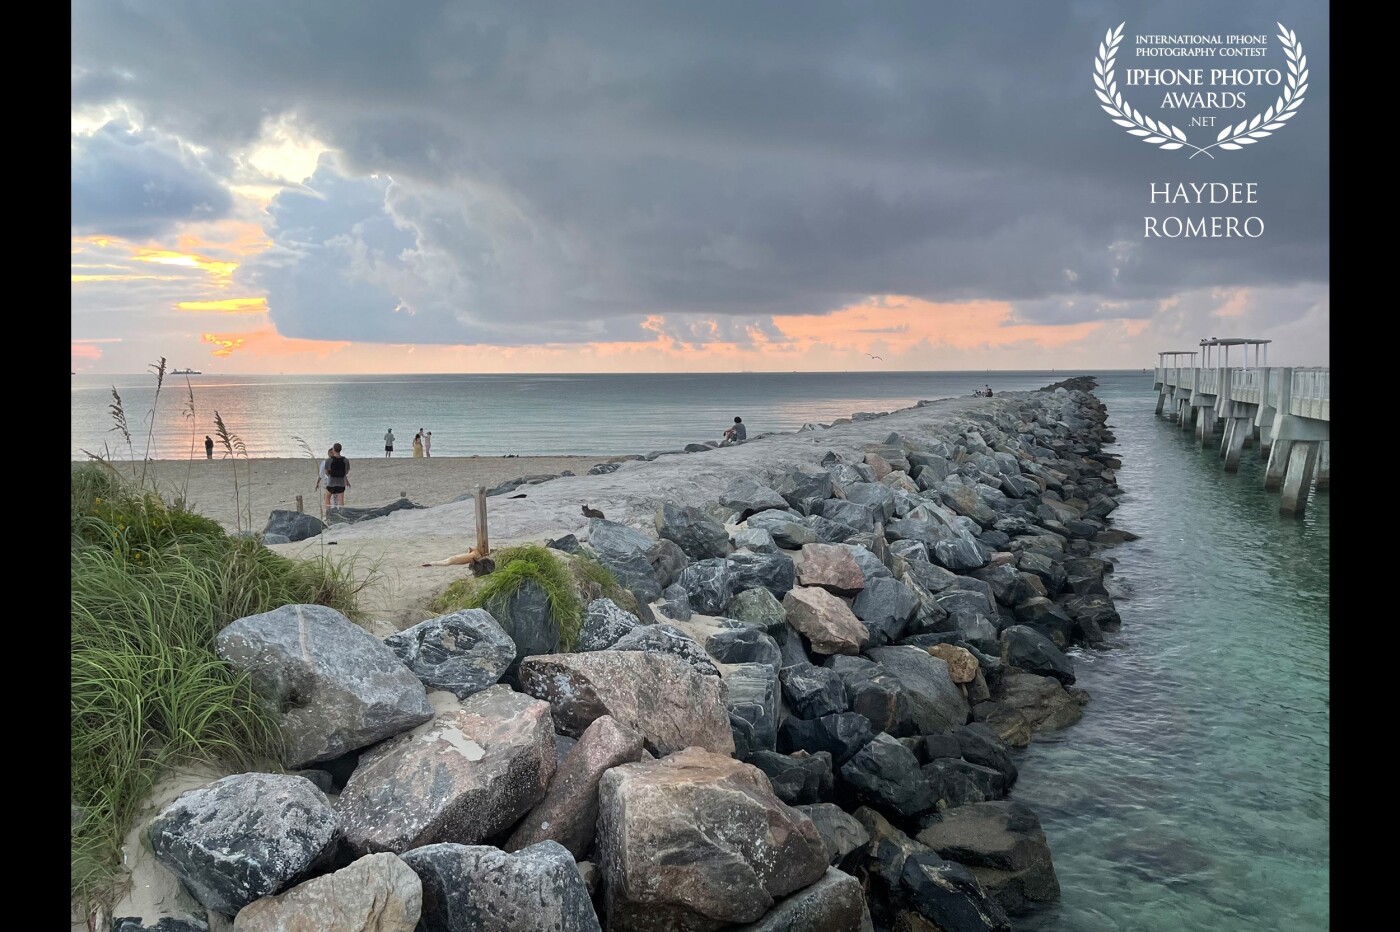 The opening sun ponds though tropical storm clouds off Miami Beach while tourists walk on the sand, take photos of daybreak or sit on the stones of a rock jetty at South Pointe Park in Miami Beach.